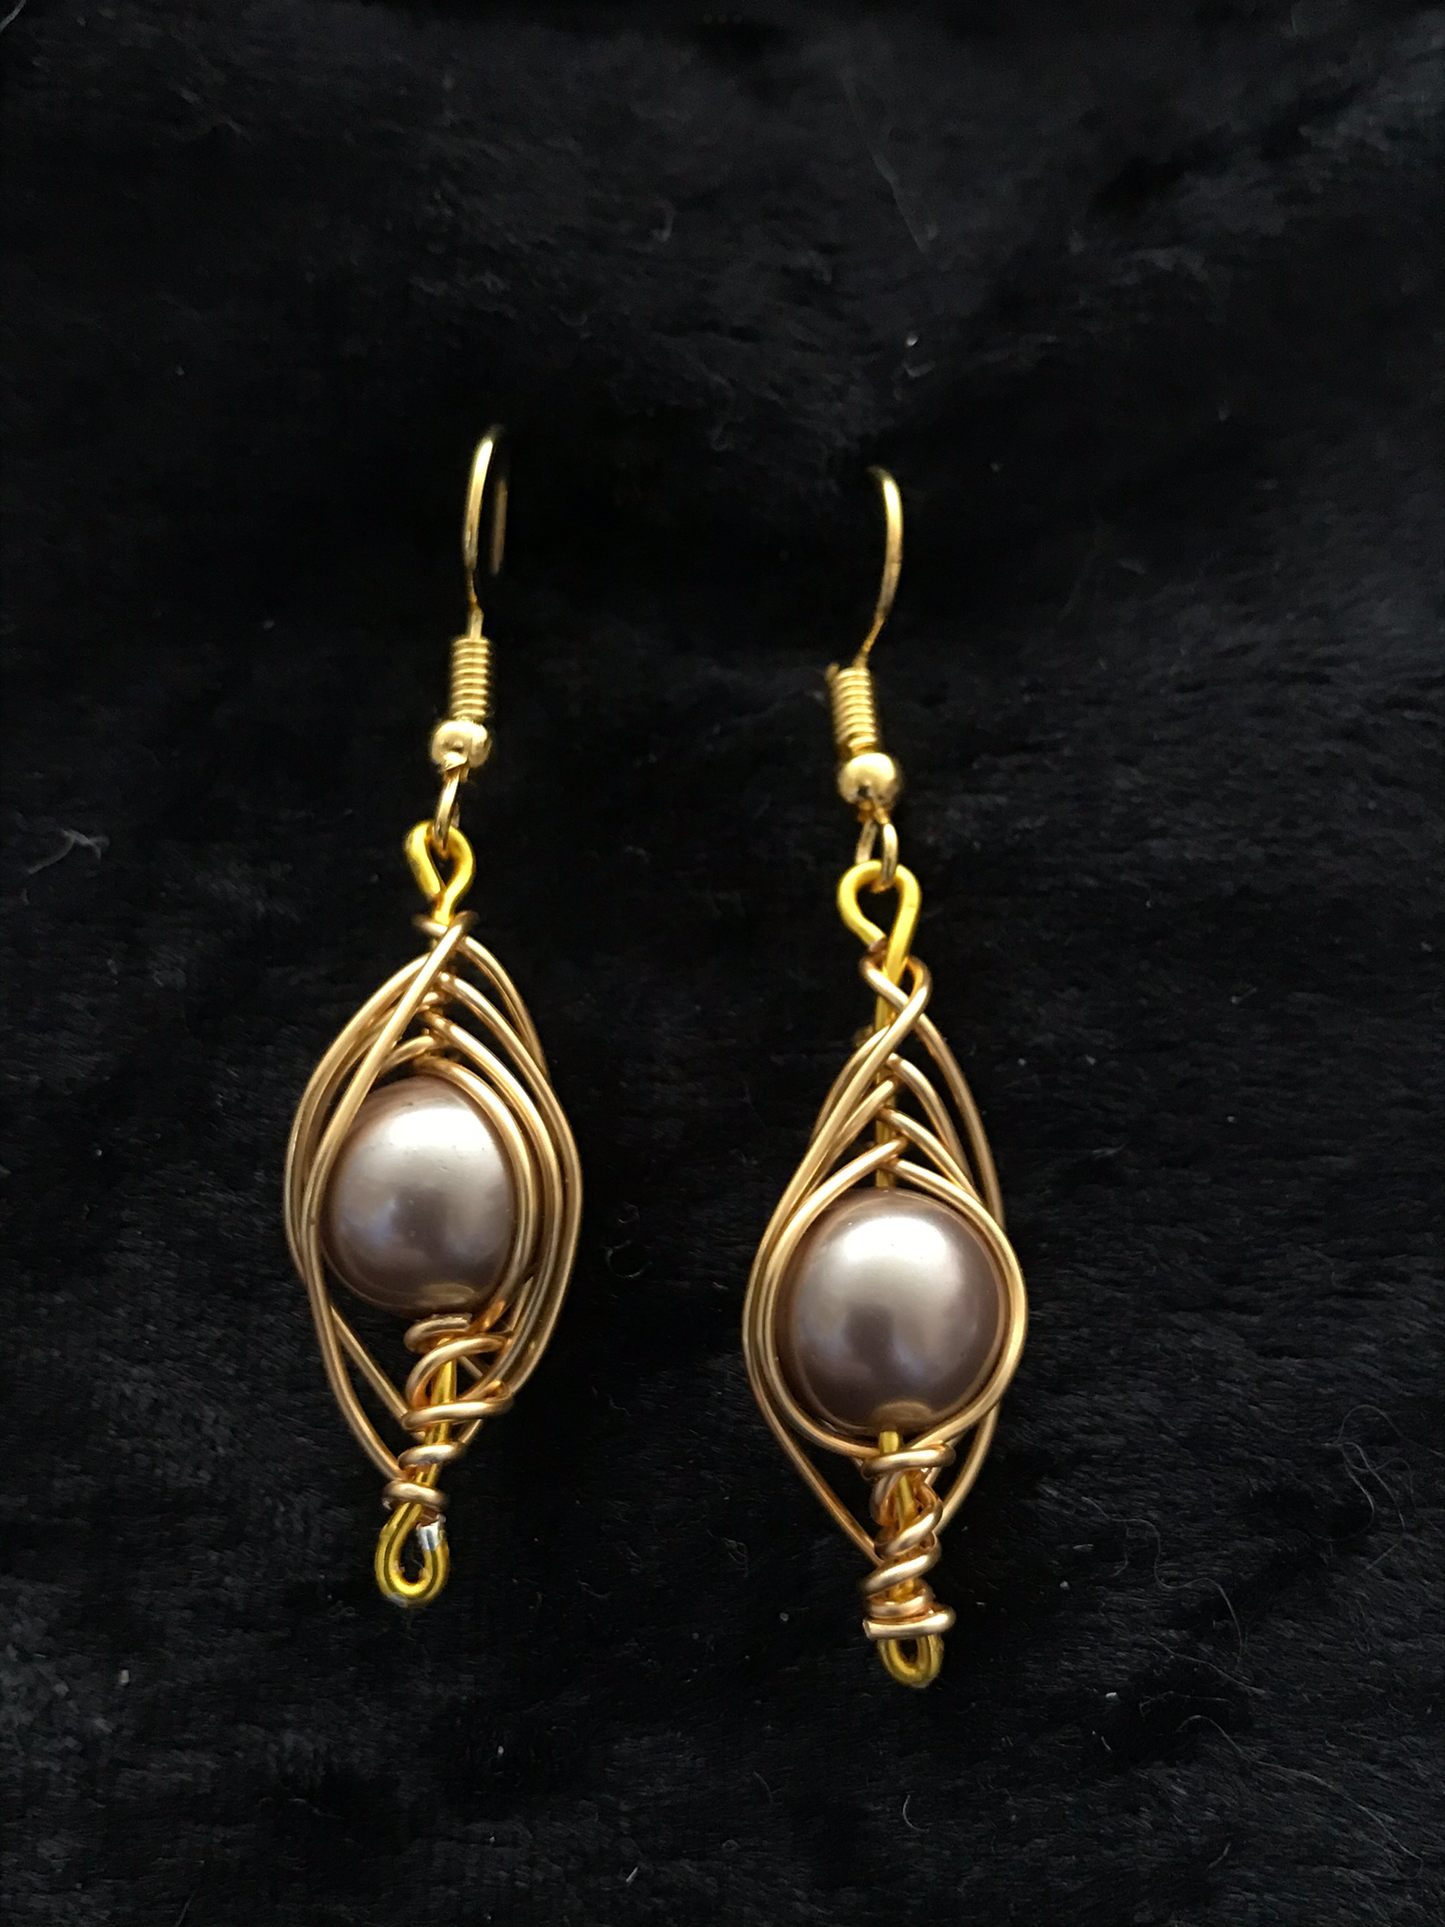 Wire & mauve pearl earrings in gold wire